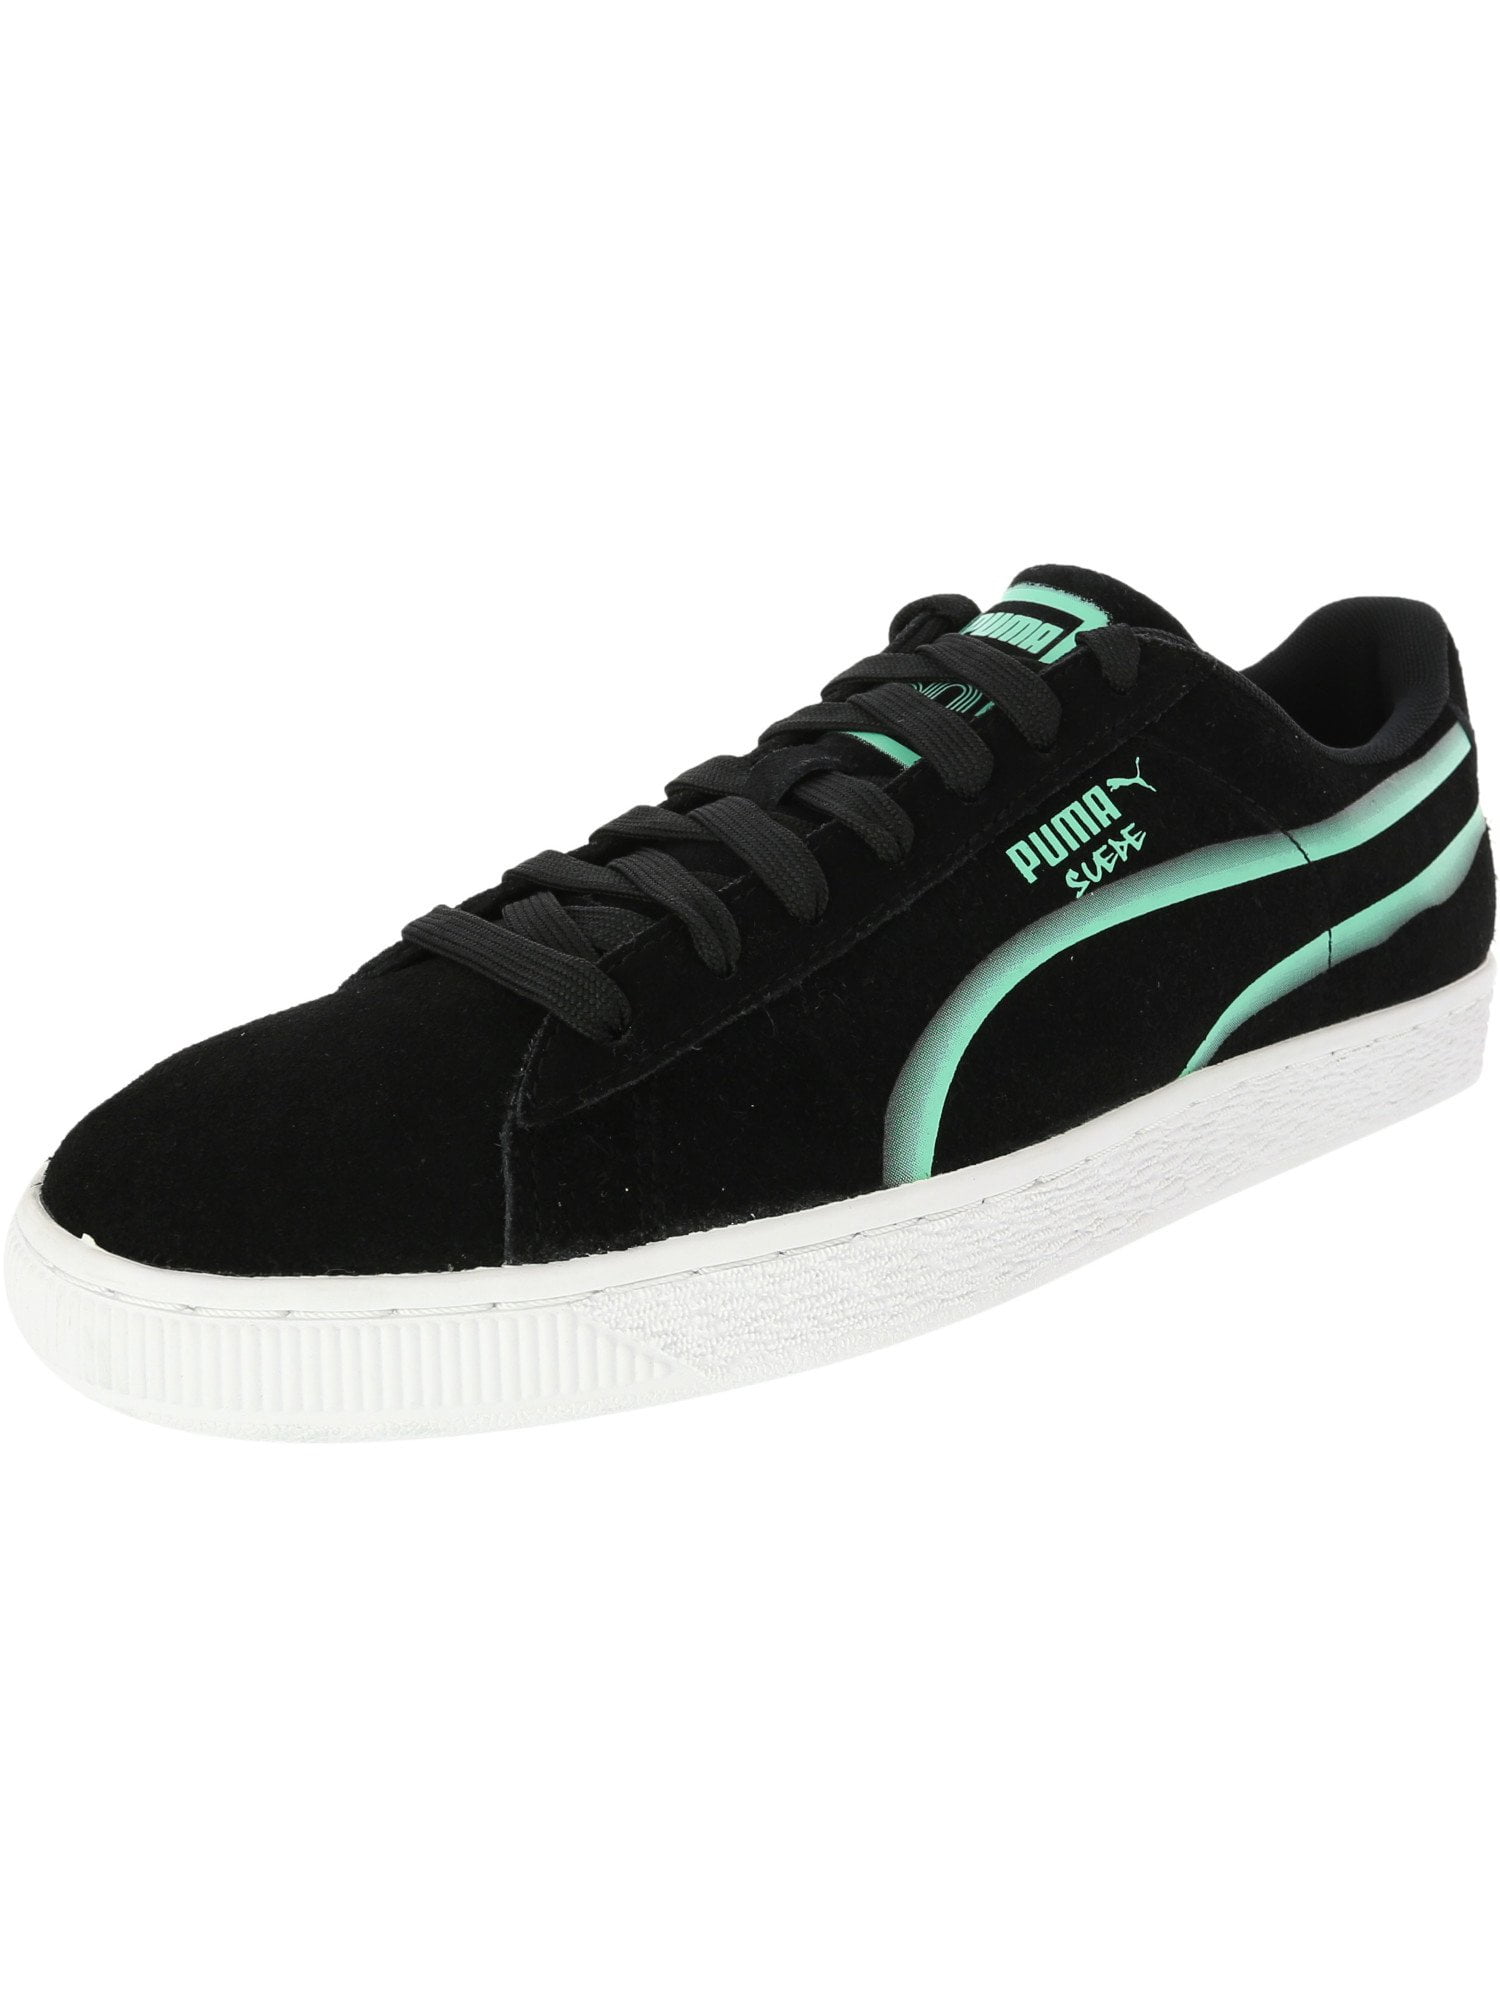 puma black and green sneakers